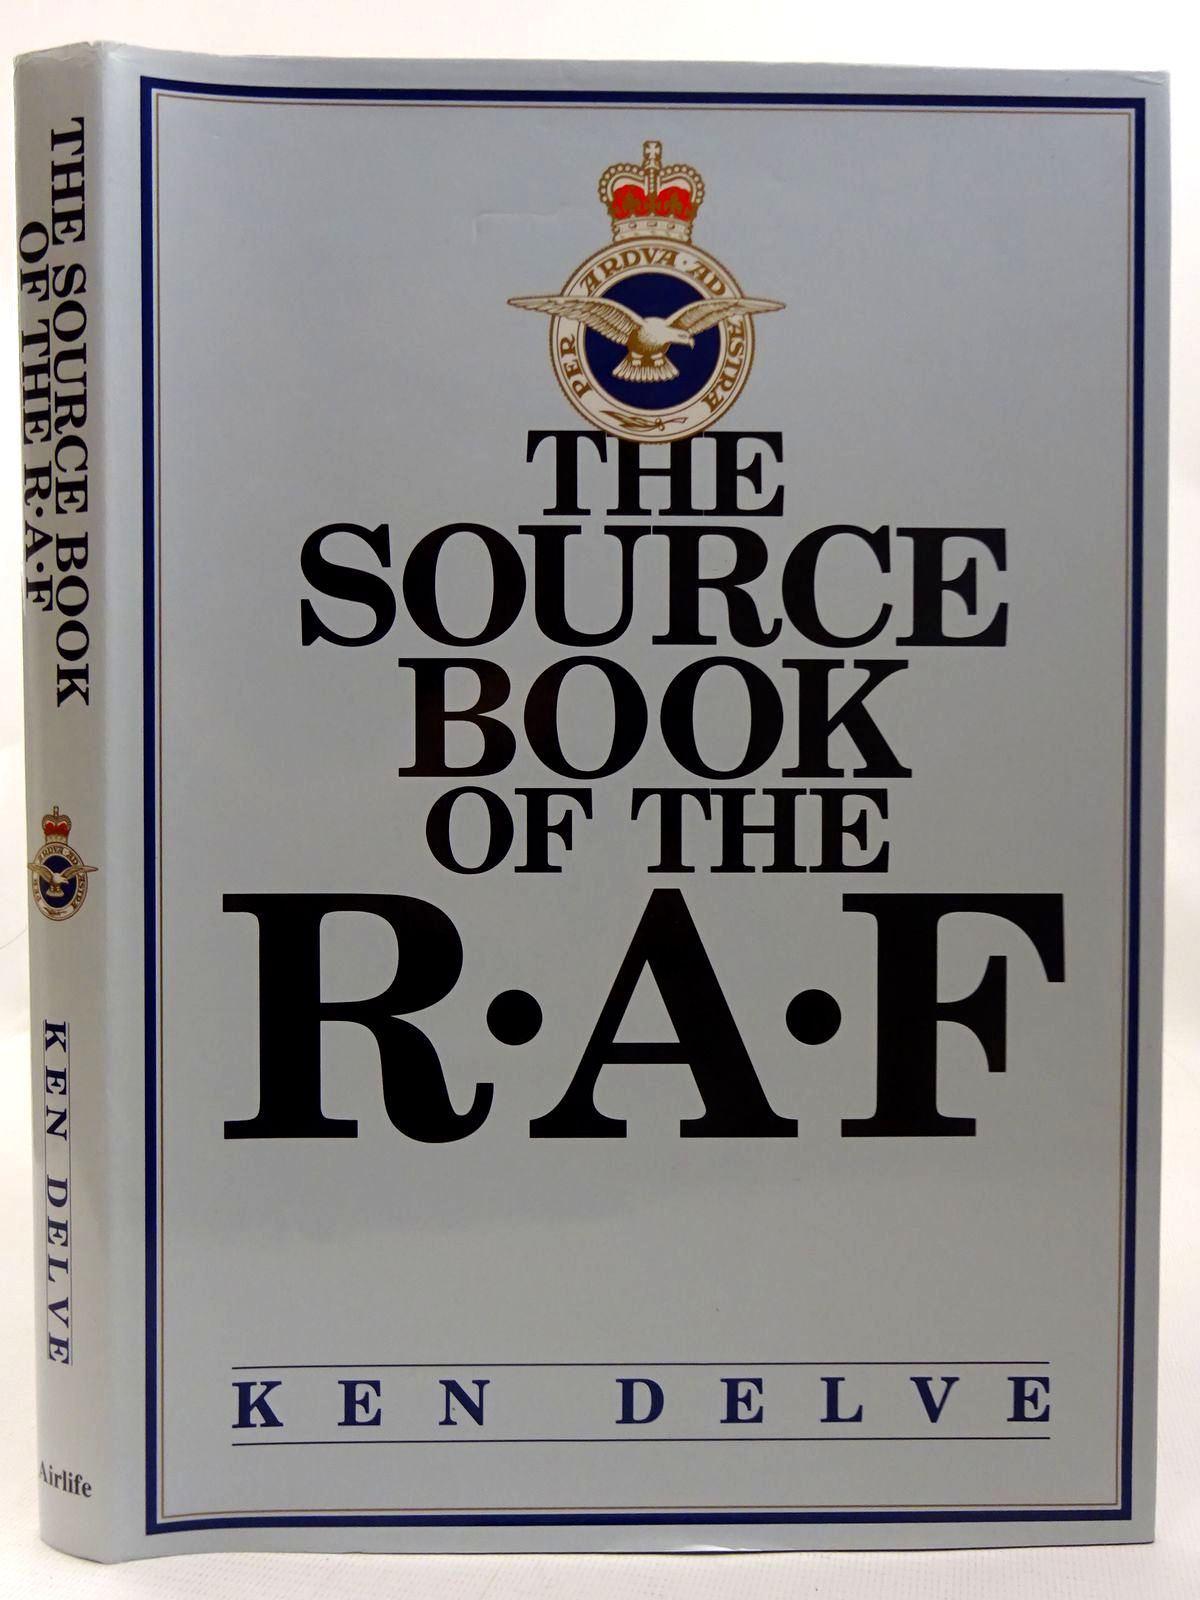 Photo of THE SOURCE BOOK OF THE R.A.F. written by Delve, Ken published by Airlife (STOCK CODE: 2126458)  for sale by Stella & Rose's Books